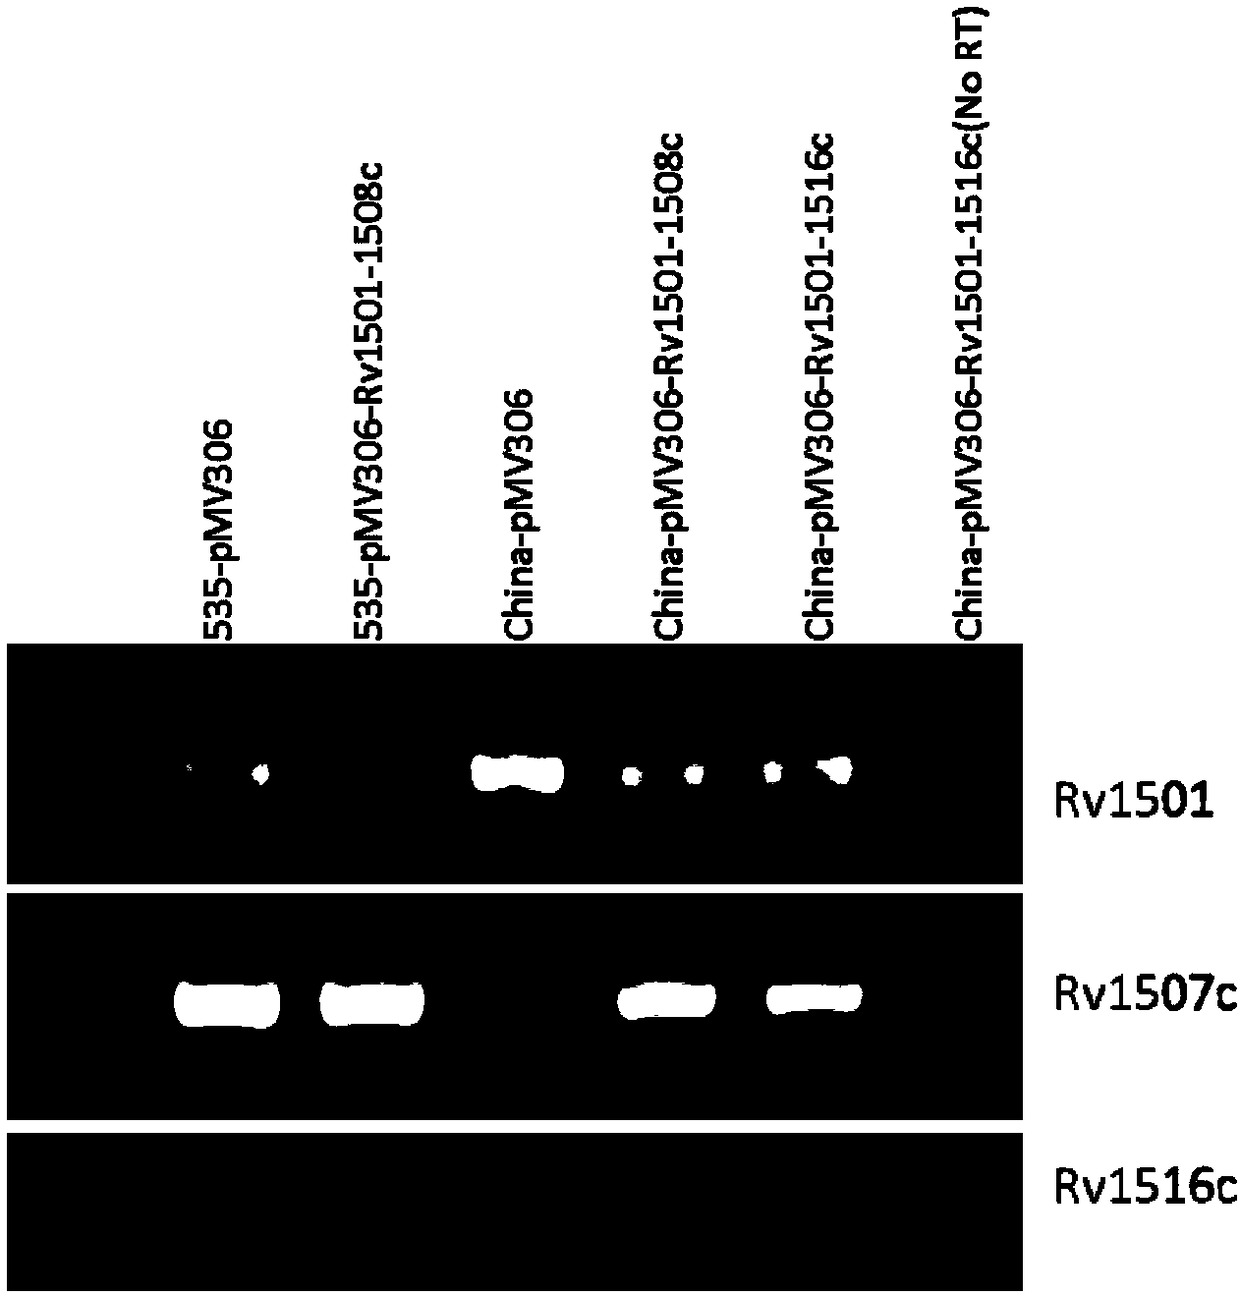 Recombinant bacillus calmette guerin vaccine, and applications thereof